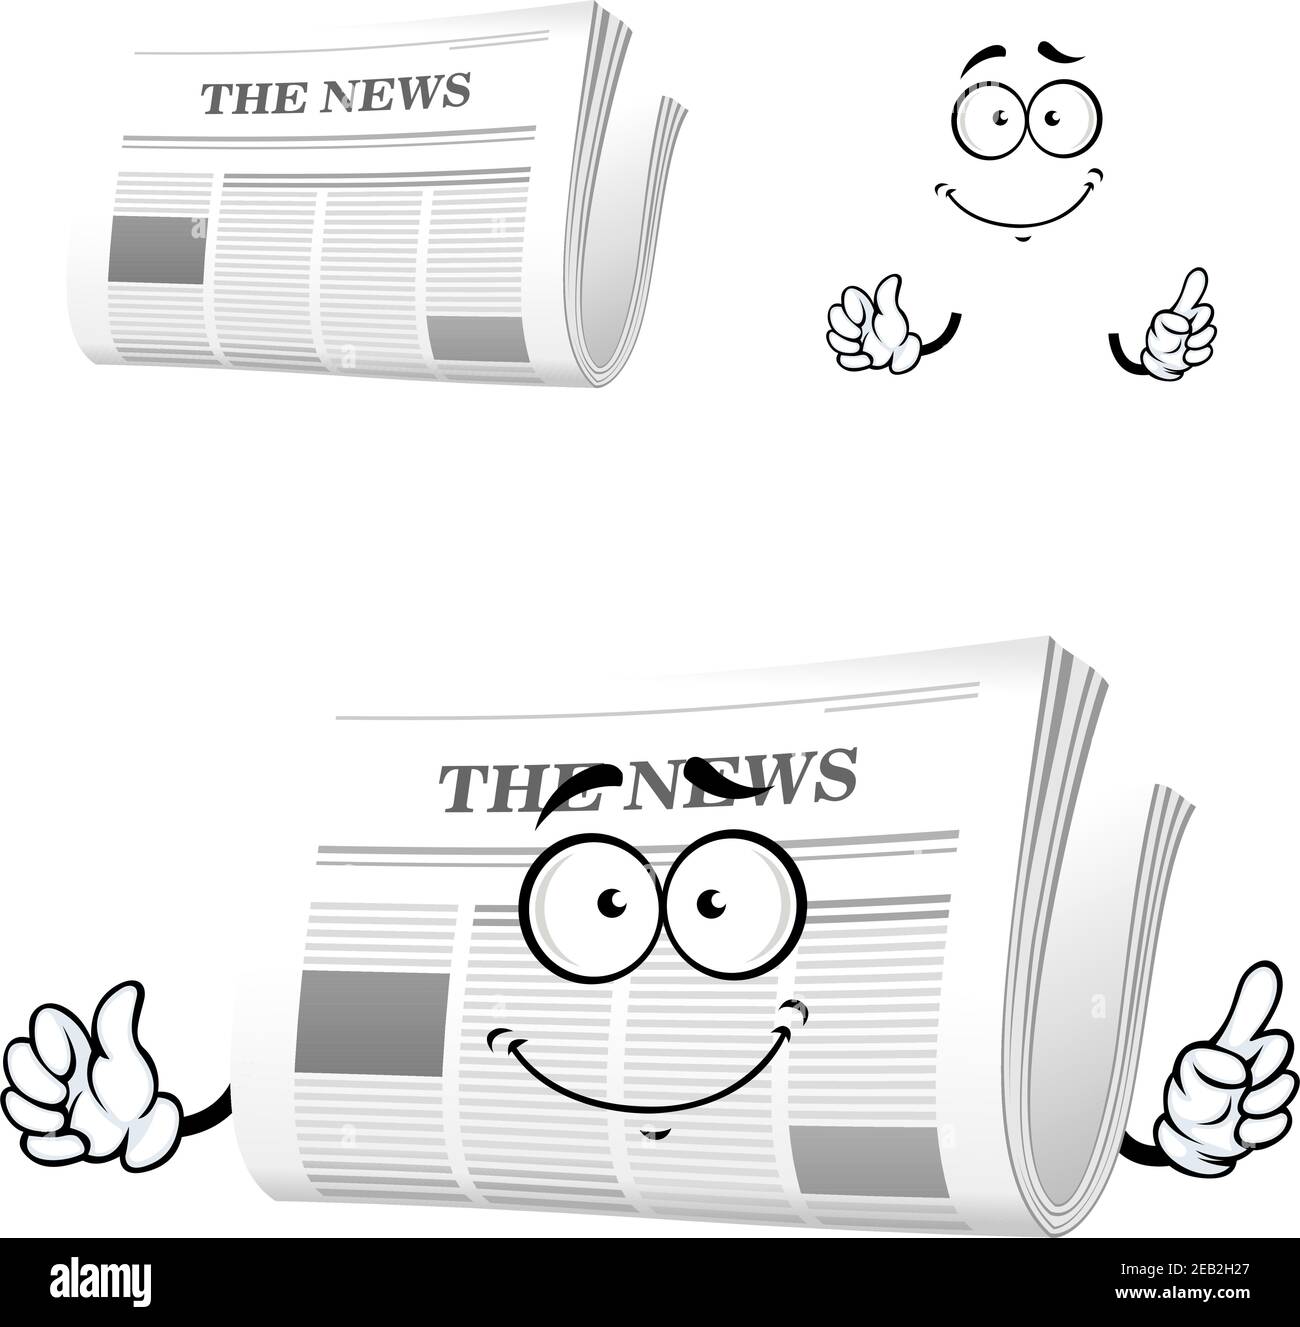 Daily Newspaper Cartoon Icon With Headline News And Smiling Face